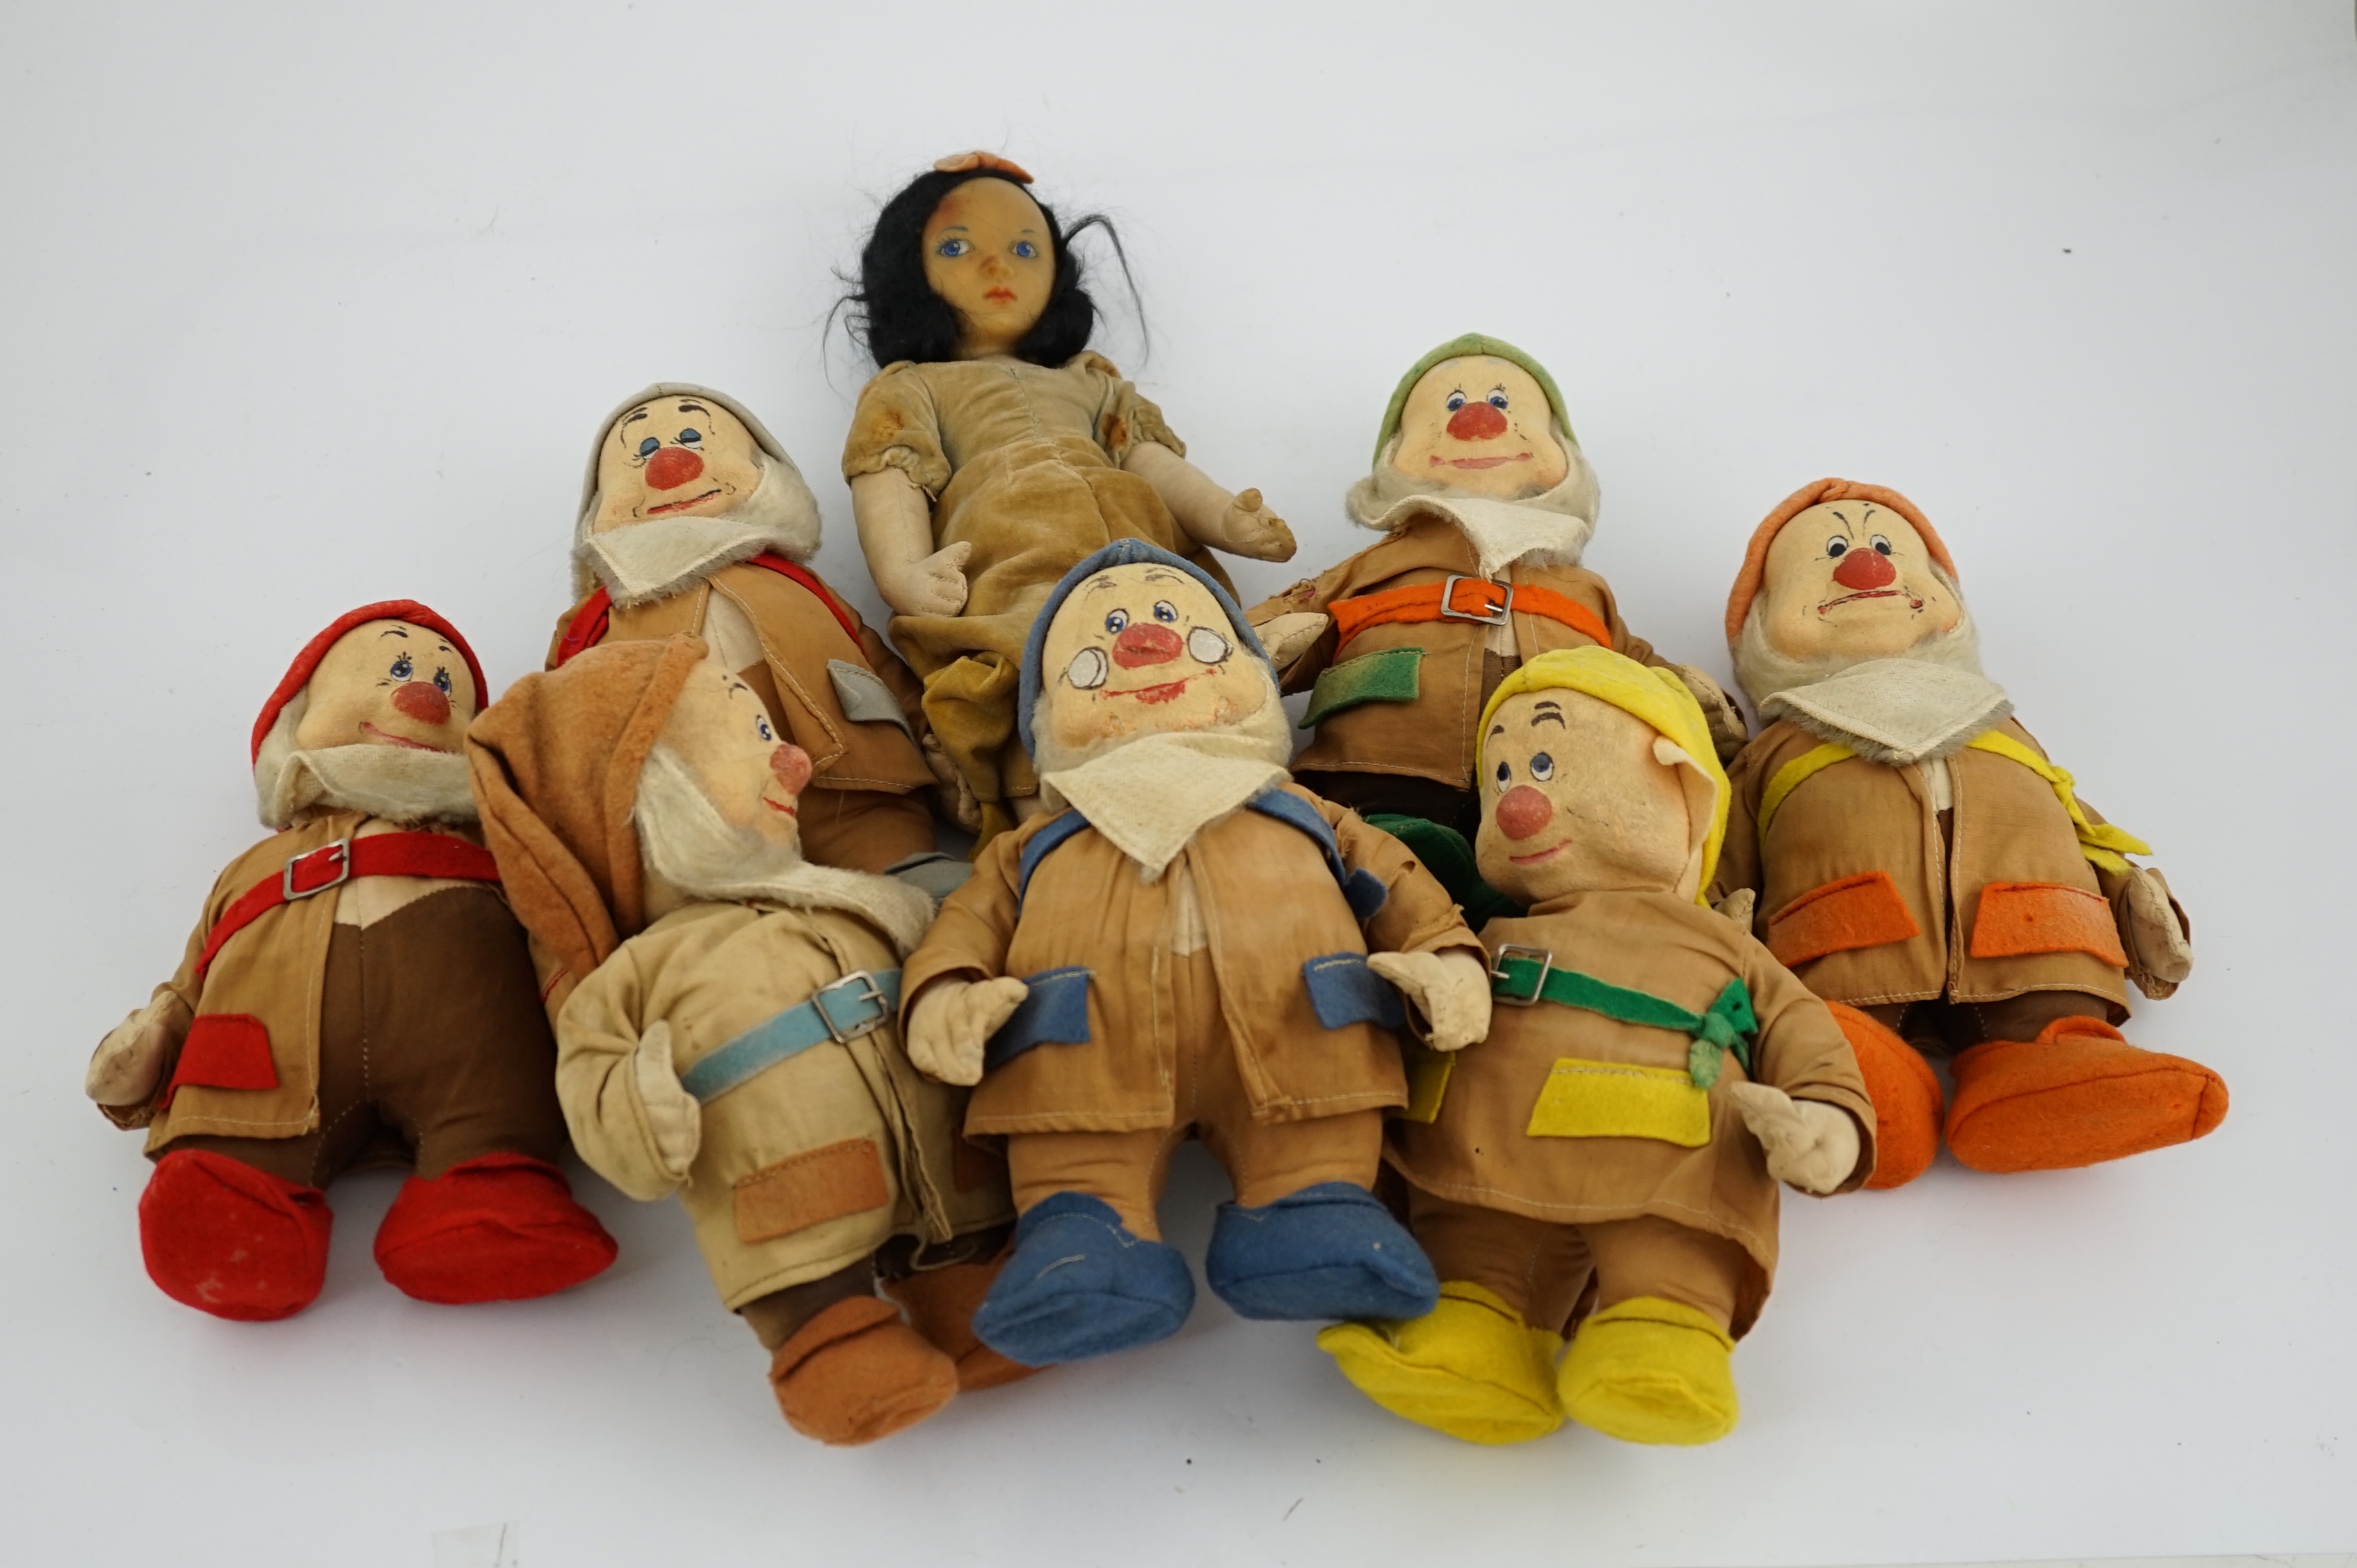 A set of Merrythought Snow White and the Seven Dwarves, Snow White with Merrythought label to the - Image 9 of 16